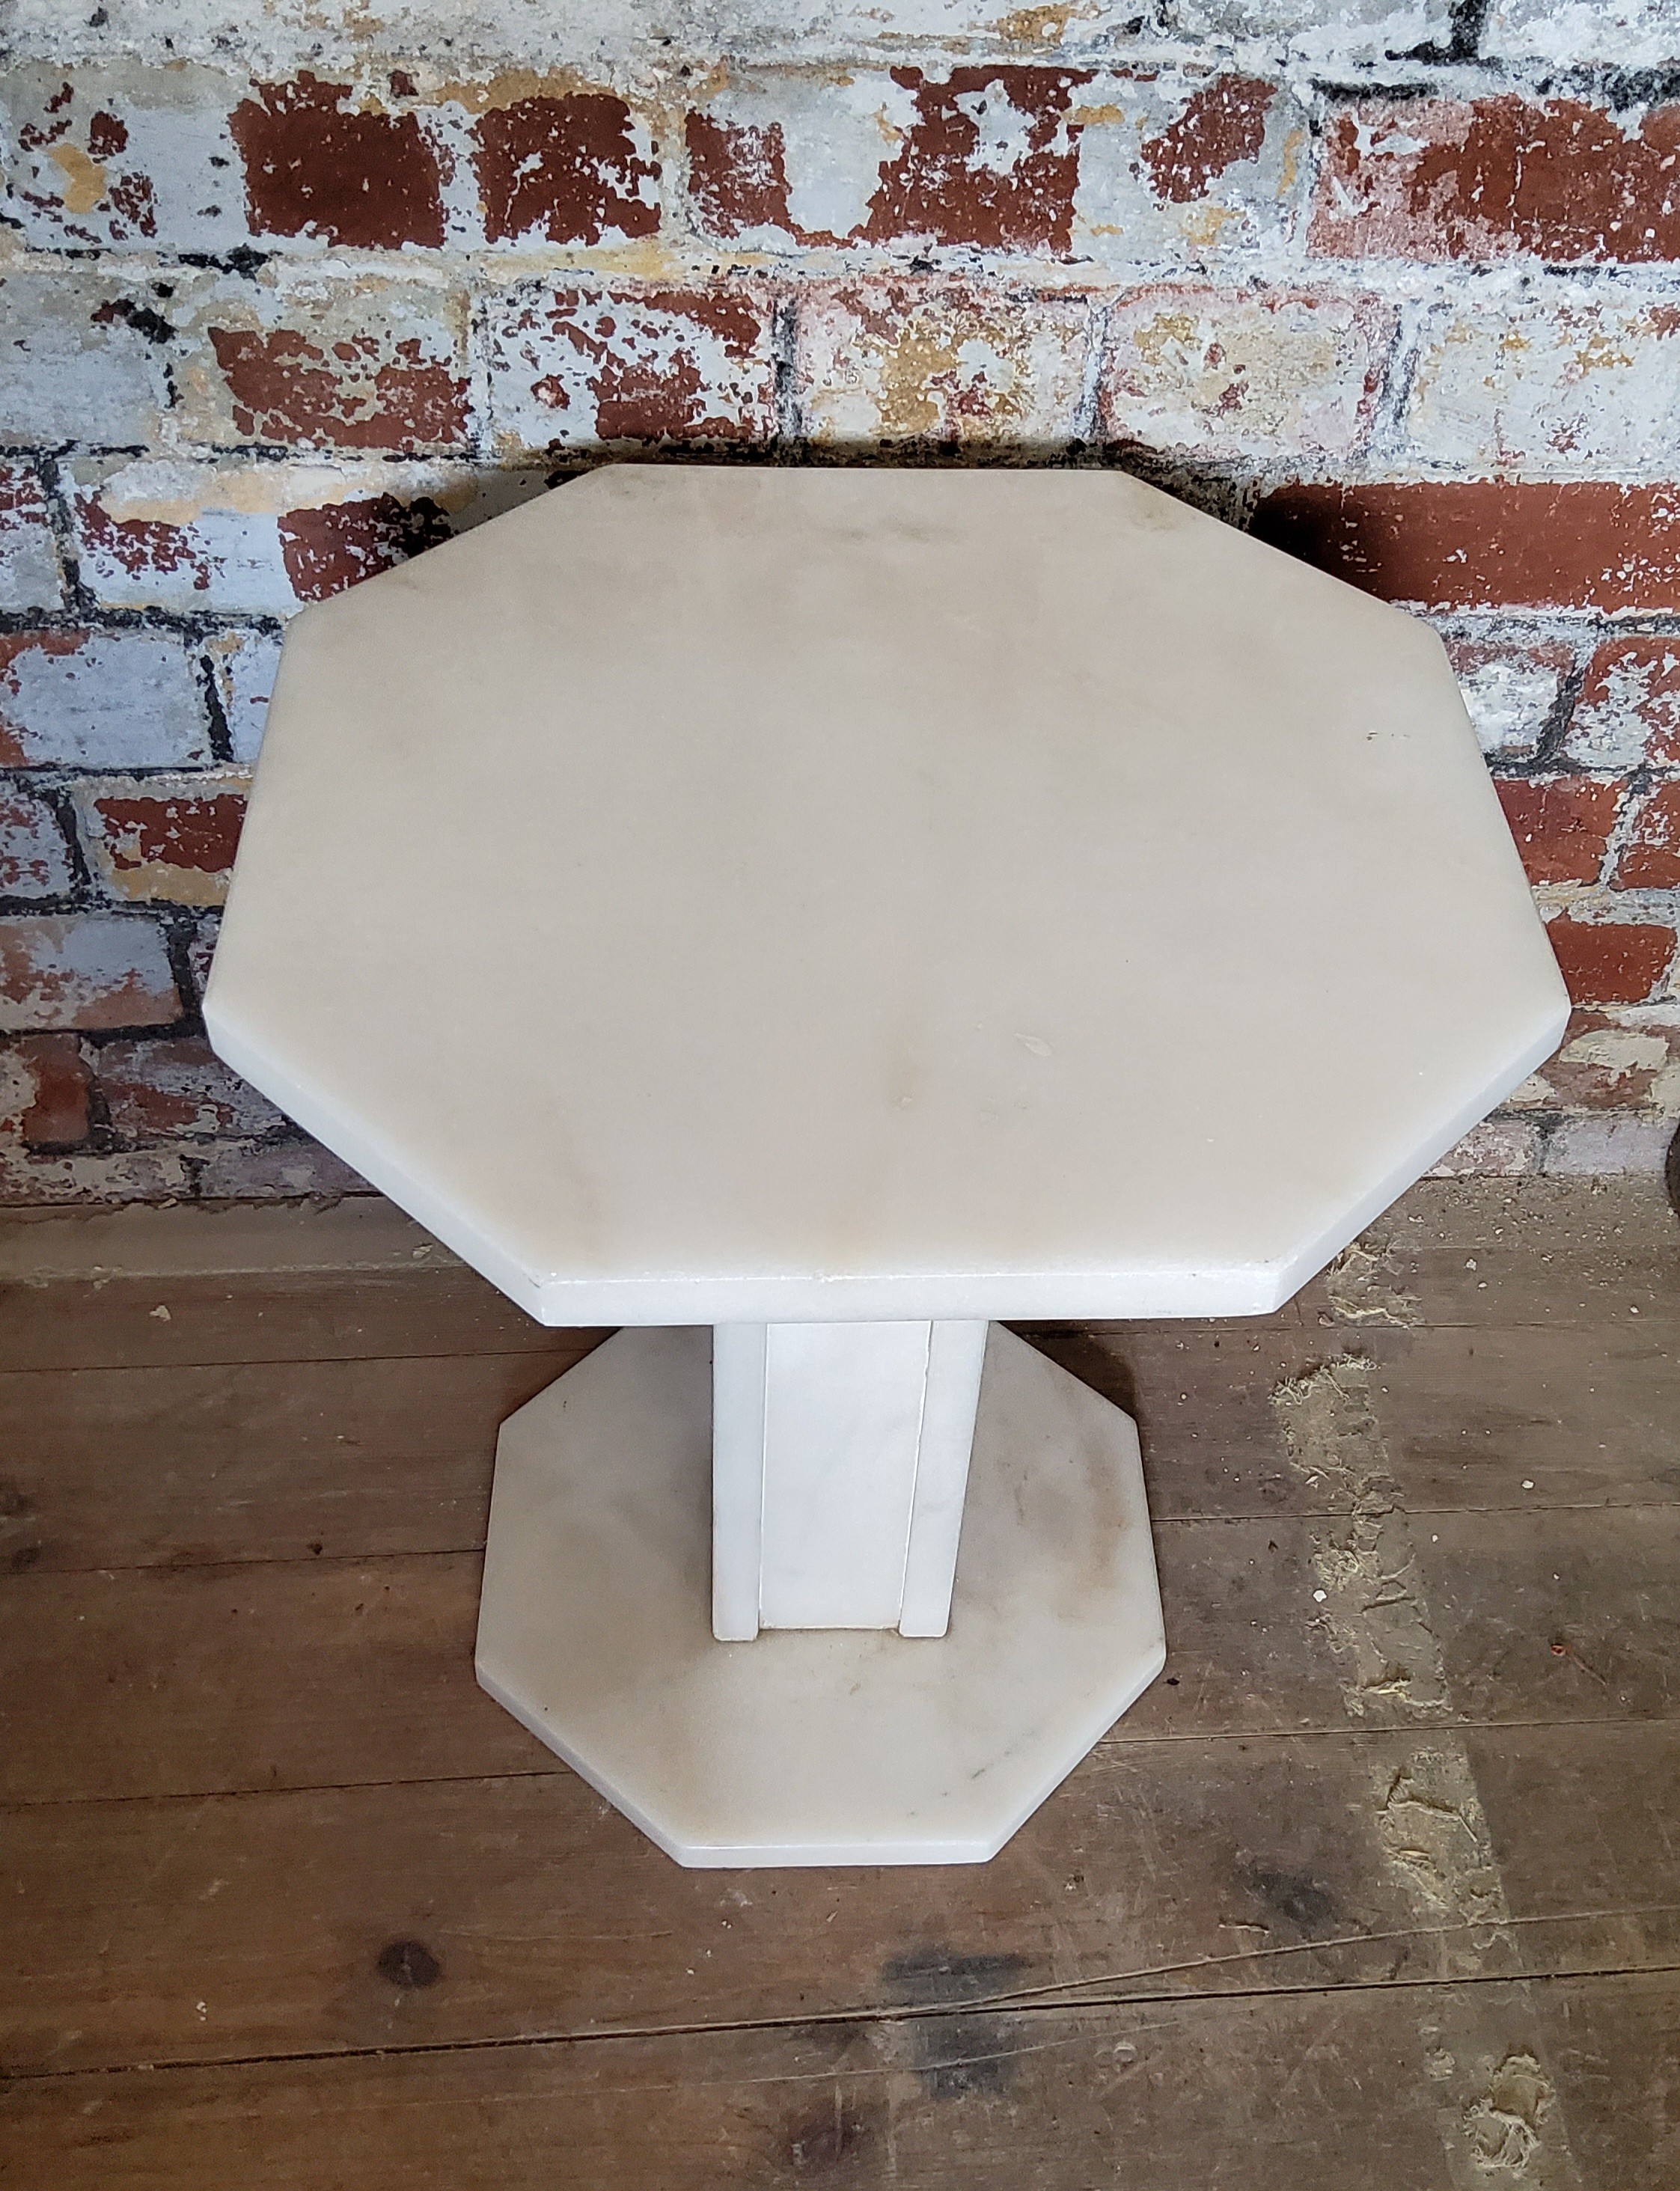 Small marble hexagonal table top stand, top is not fixed to plinth. Height 45cm x depth 40.5cm x - Image 2 of 2